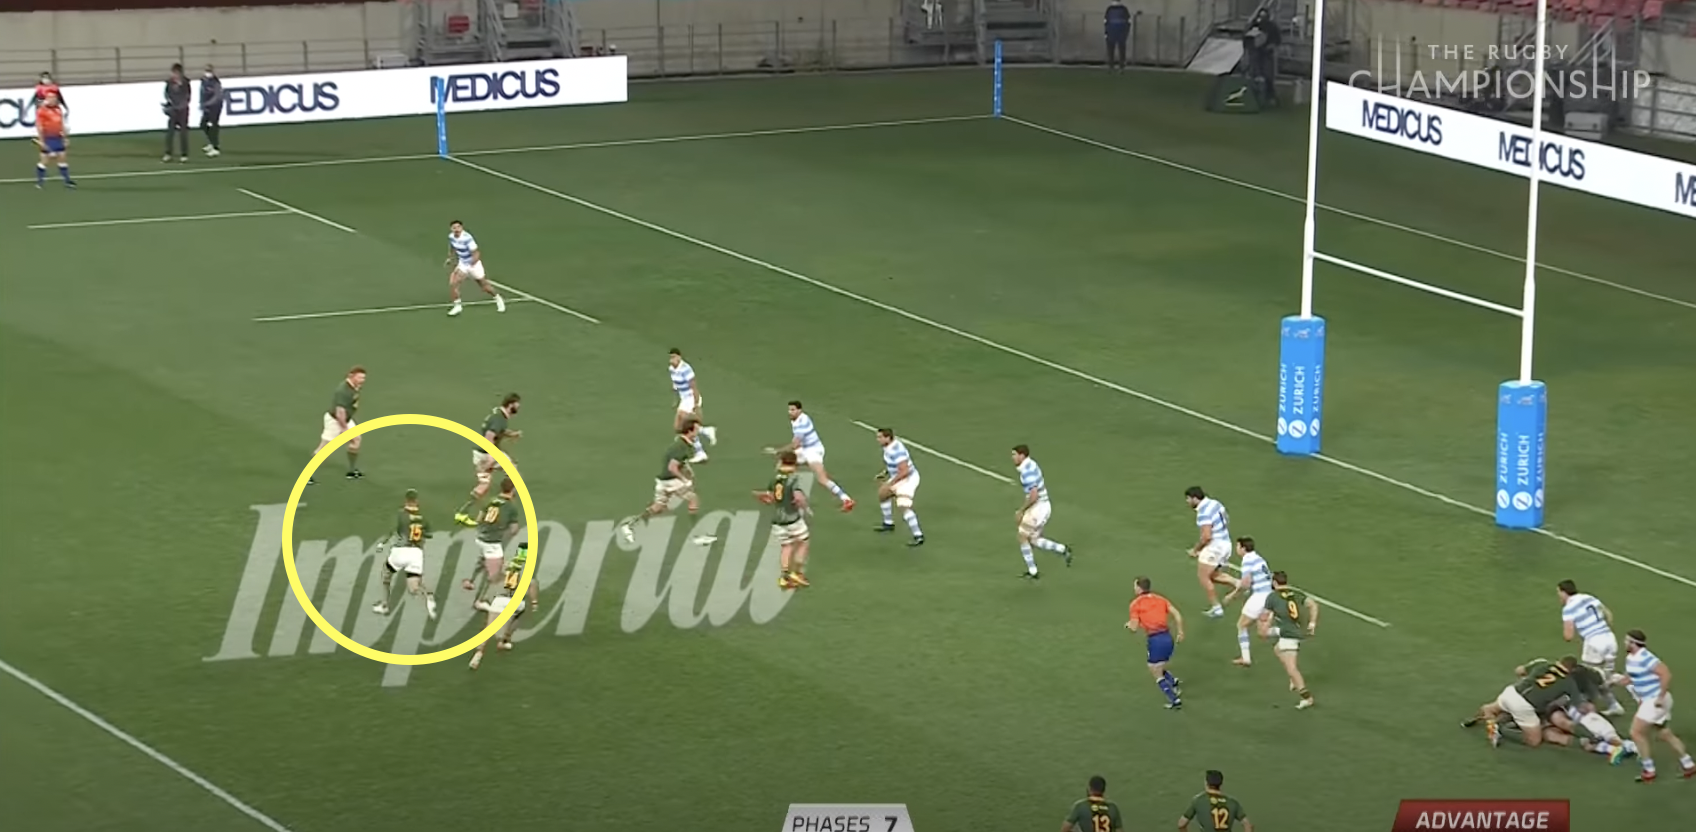 Springbok's insane off the ball activity is captured